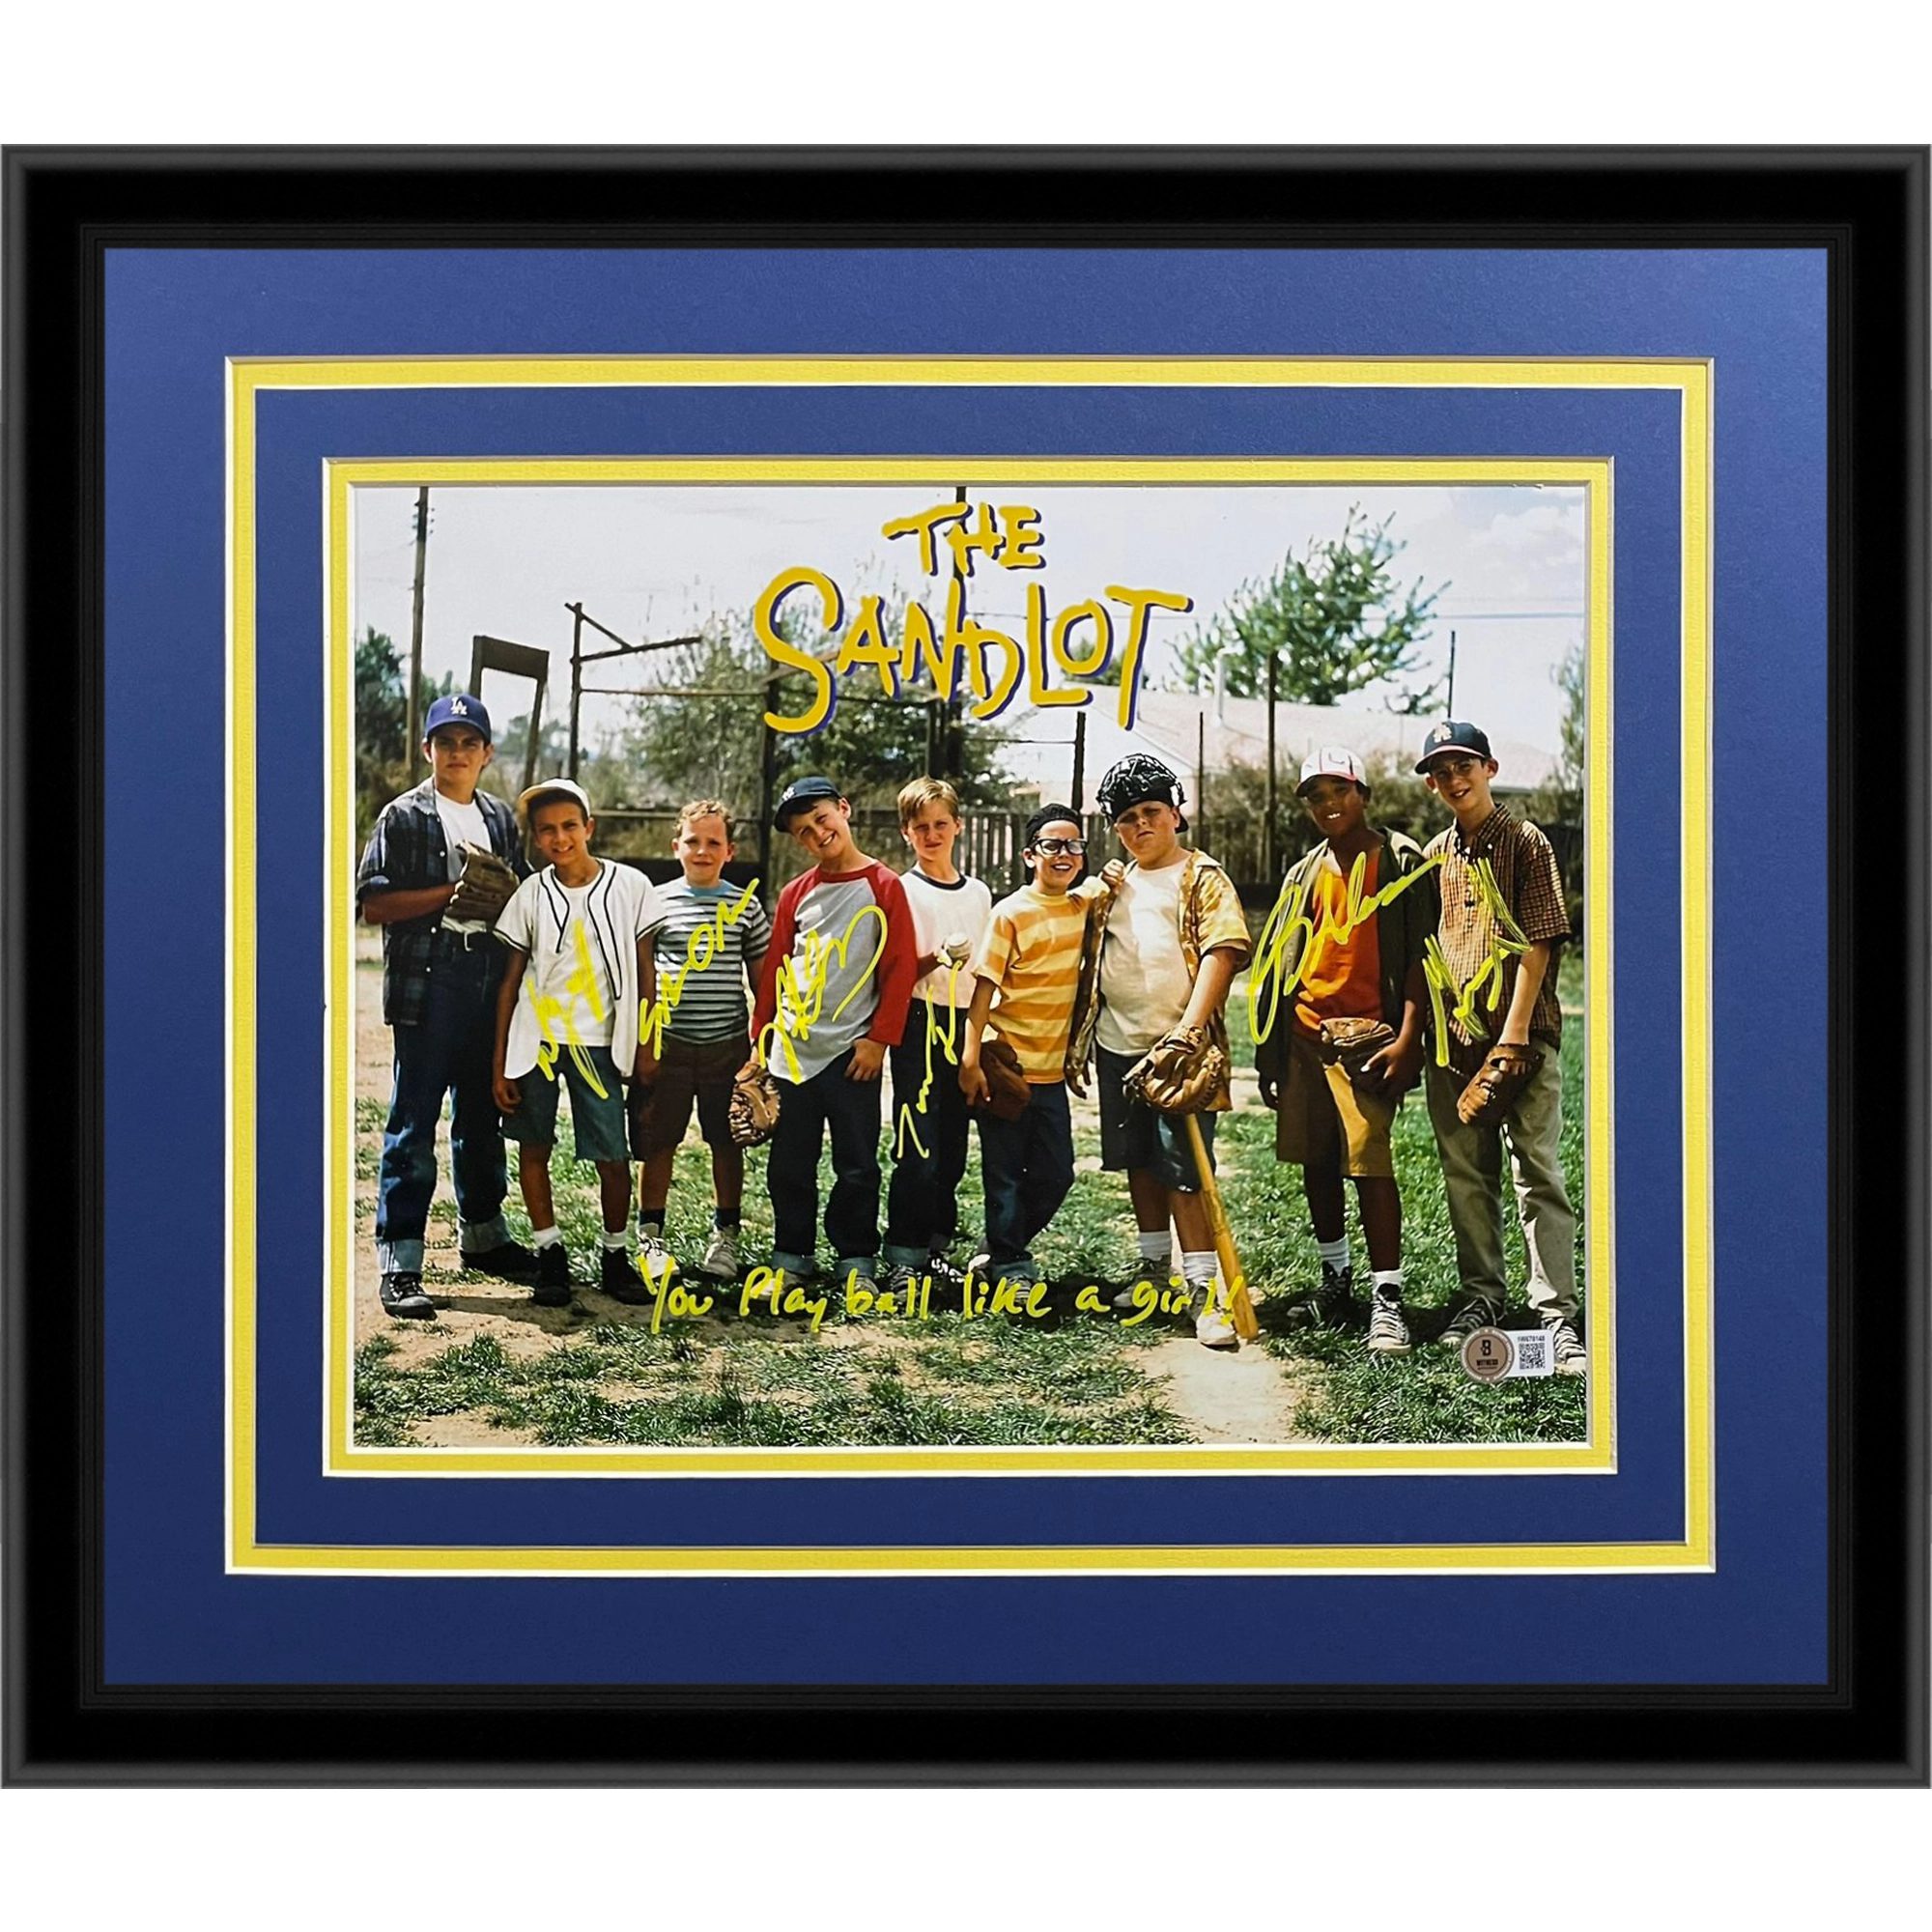 The Sandlot Cast Autographed Horiz (Lineup) Deluxe Framed 11x14 Movie Photo w/ Inscr - 6 signatures - Beckett